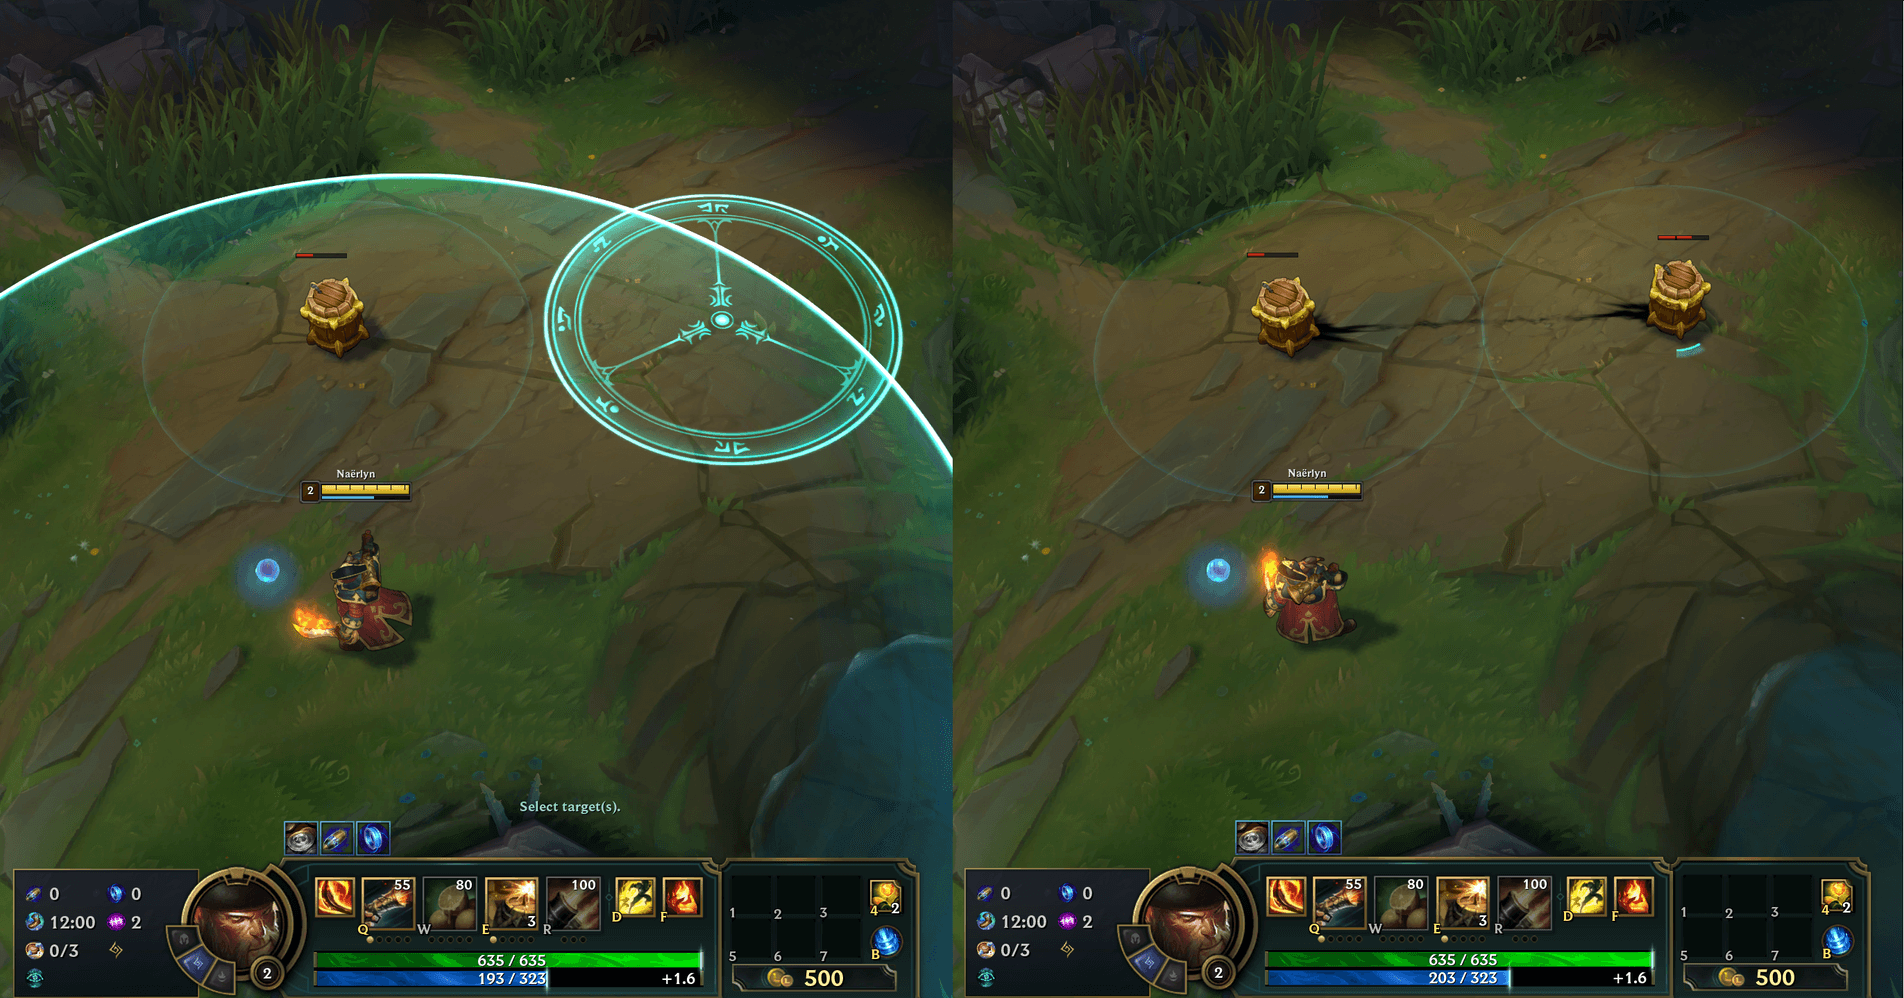 Barrels are connected even outside of range